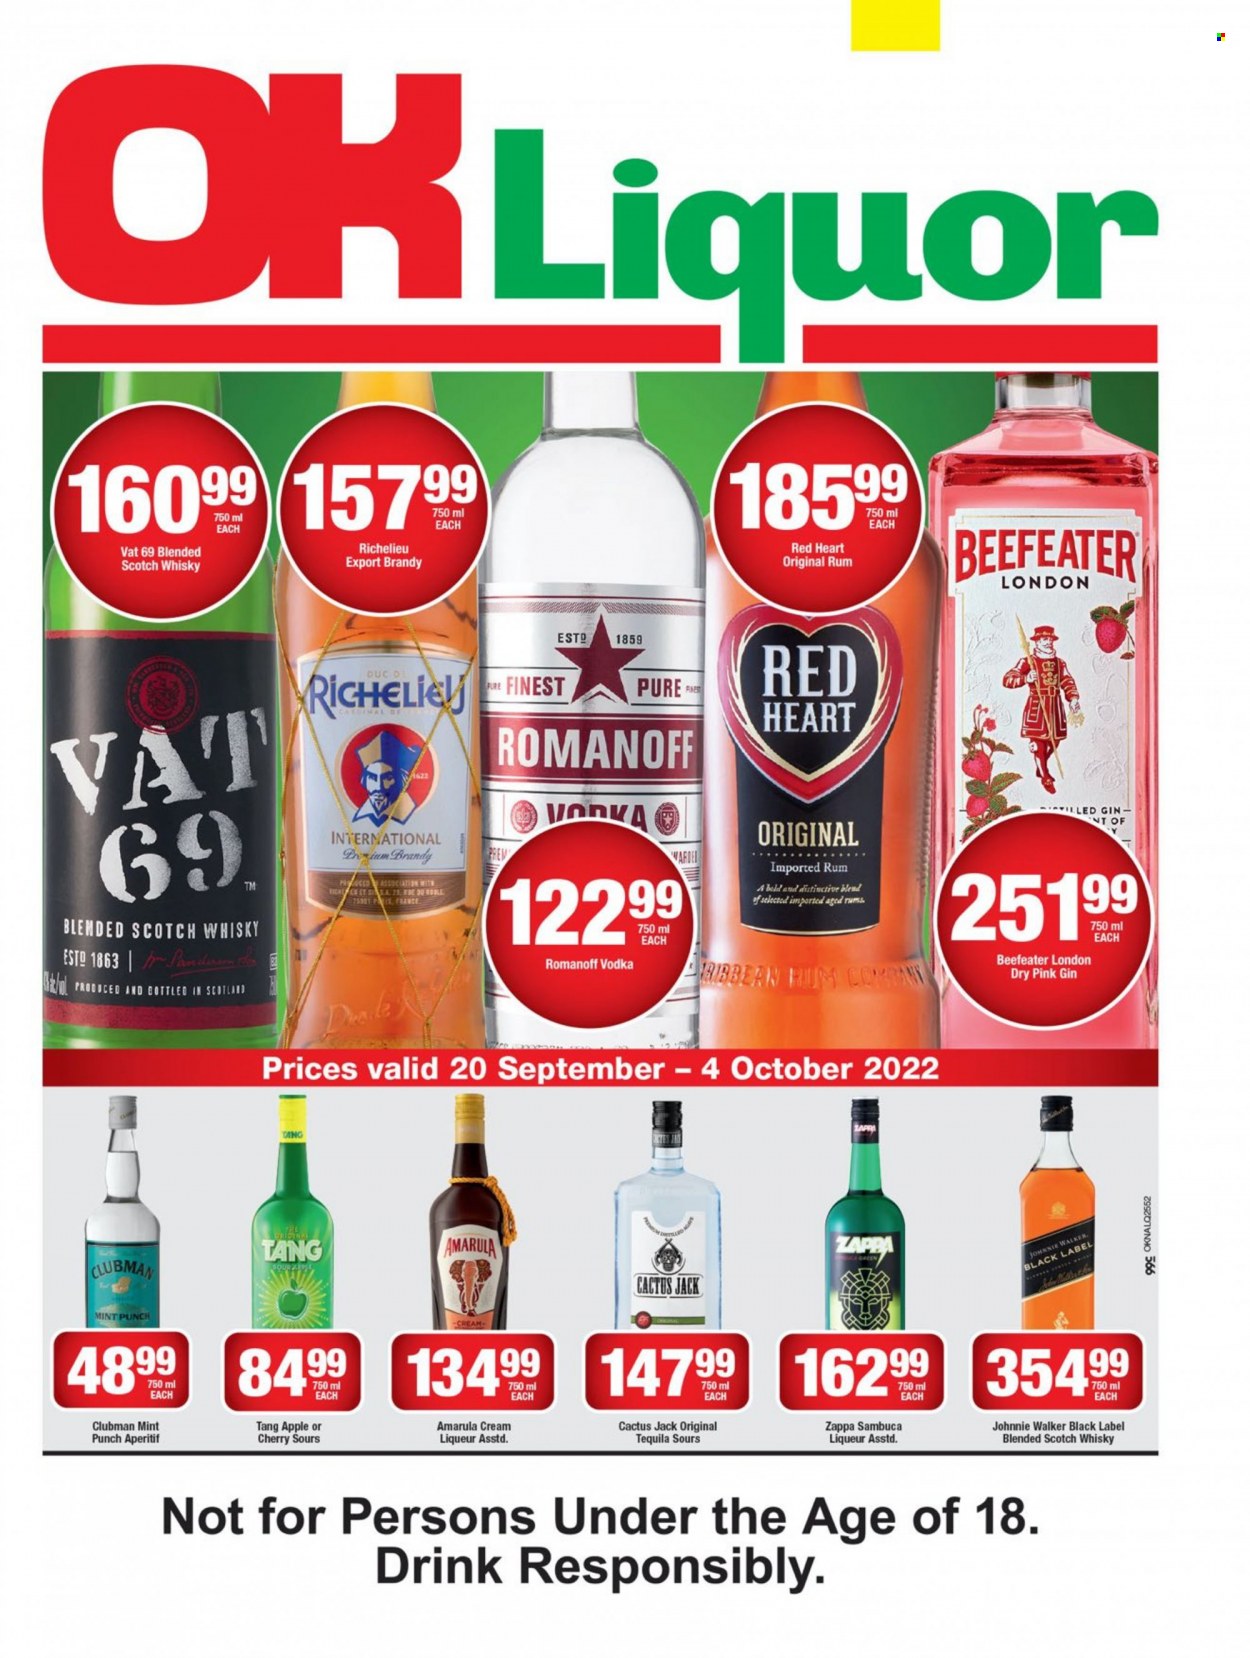 thumbnail - OK catalogue  - 20/09/2022 - 04/10/2022 - Sales products - brandy, gin, liqueur, rum, tequila, vodka, liquor, Johnnie Walker, punch, Beefeater, Richelieu, Amarula, Red Heart, Vat 69, scotch whisky, whisky, aperitif. Page 1.